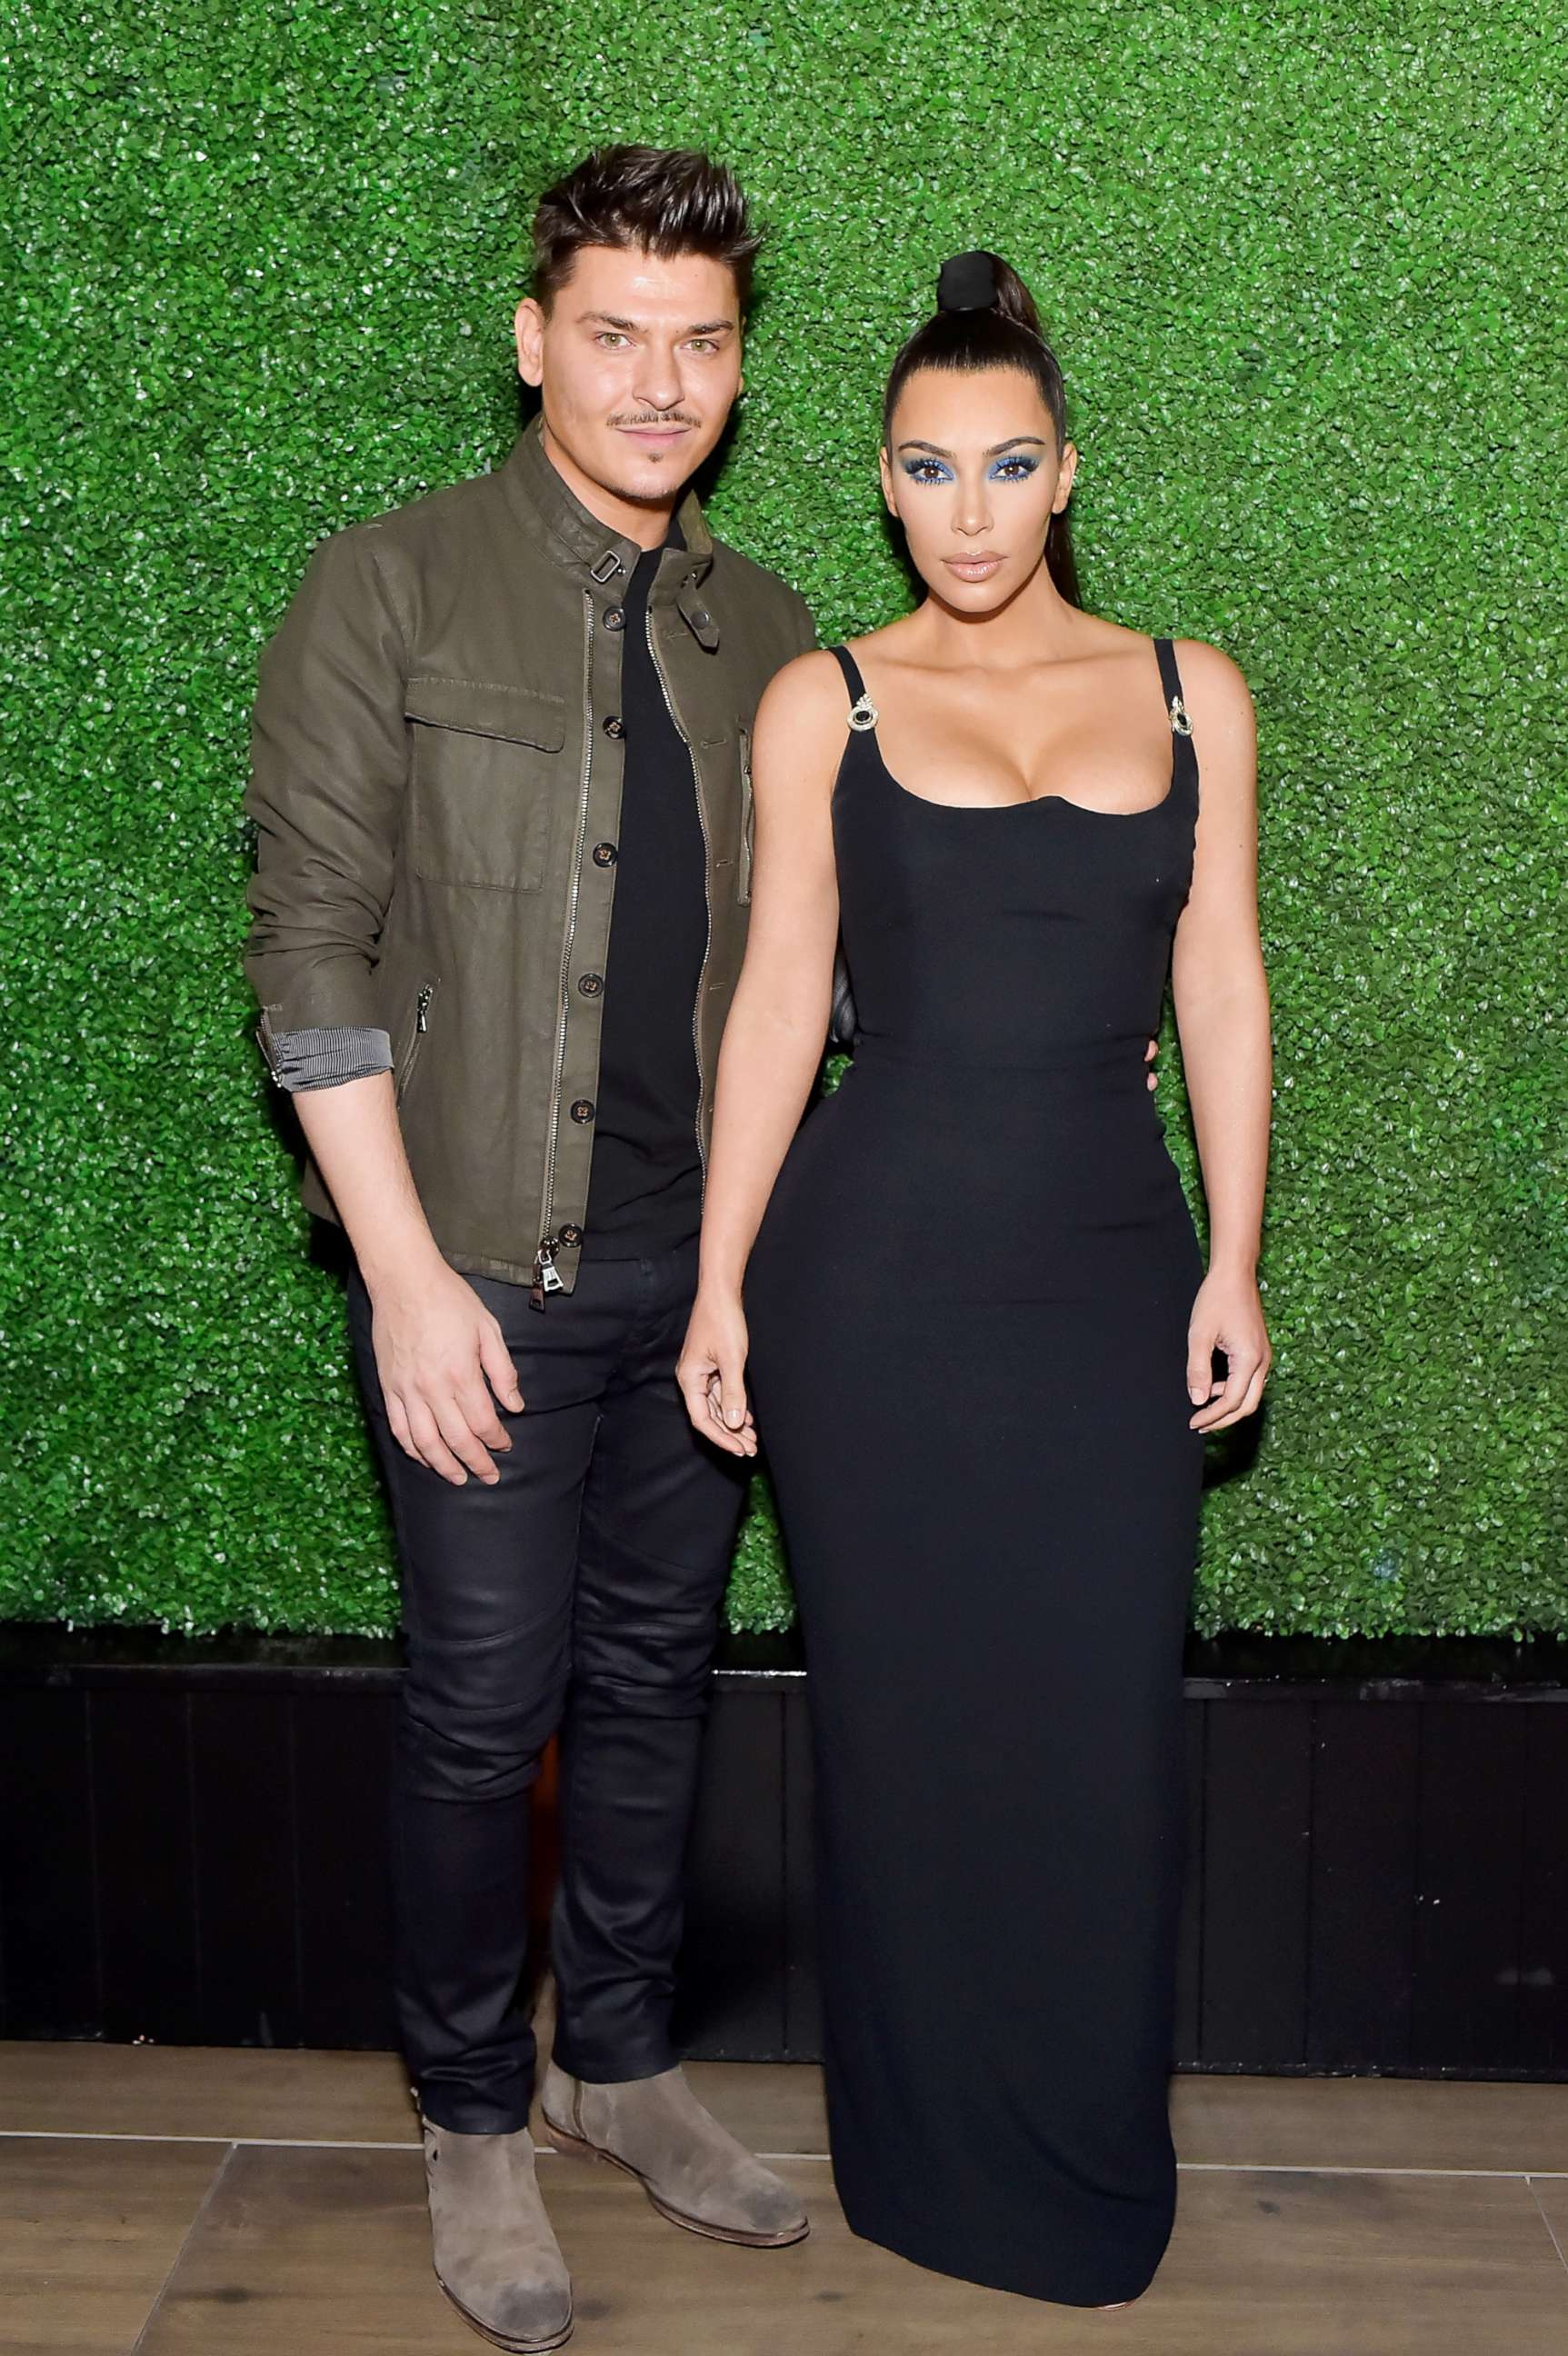 PHOTO: Mario Dedivanovic (L) and Kim Kardashian West attend KKWxMario Dinner at Jean-Georges Beverly Hills, March 31, 2018 in Beverly Hills, Calif.